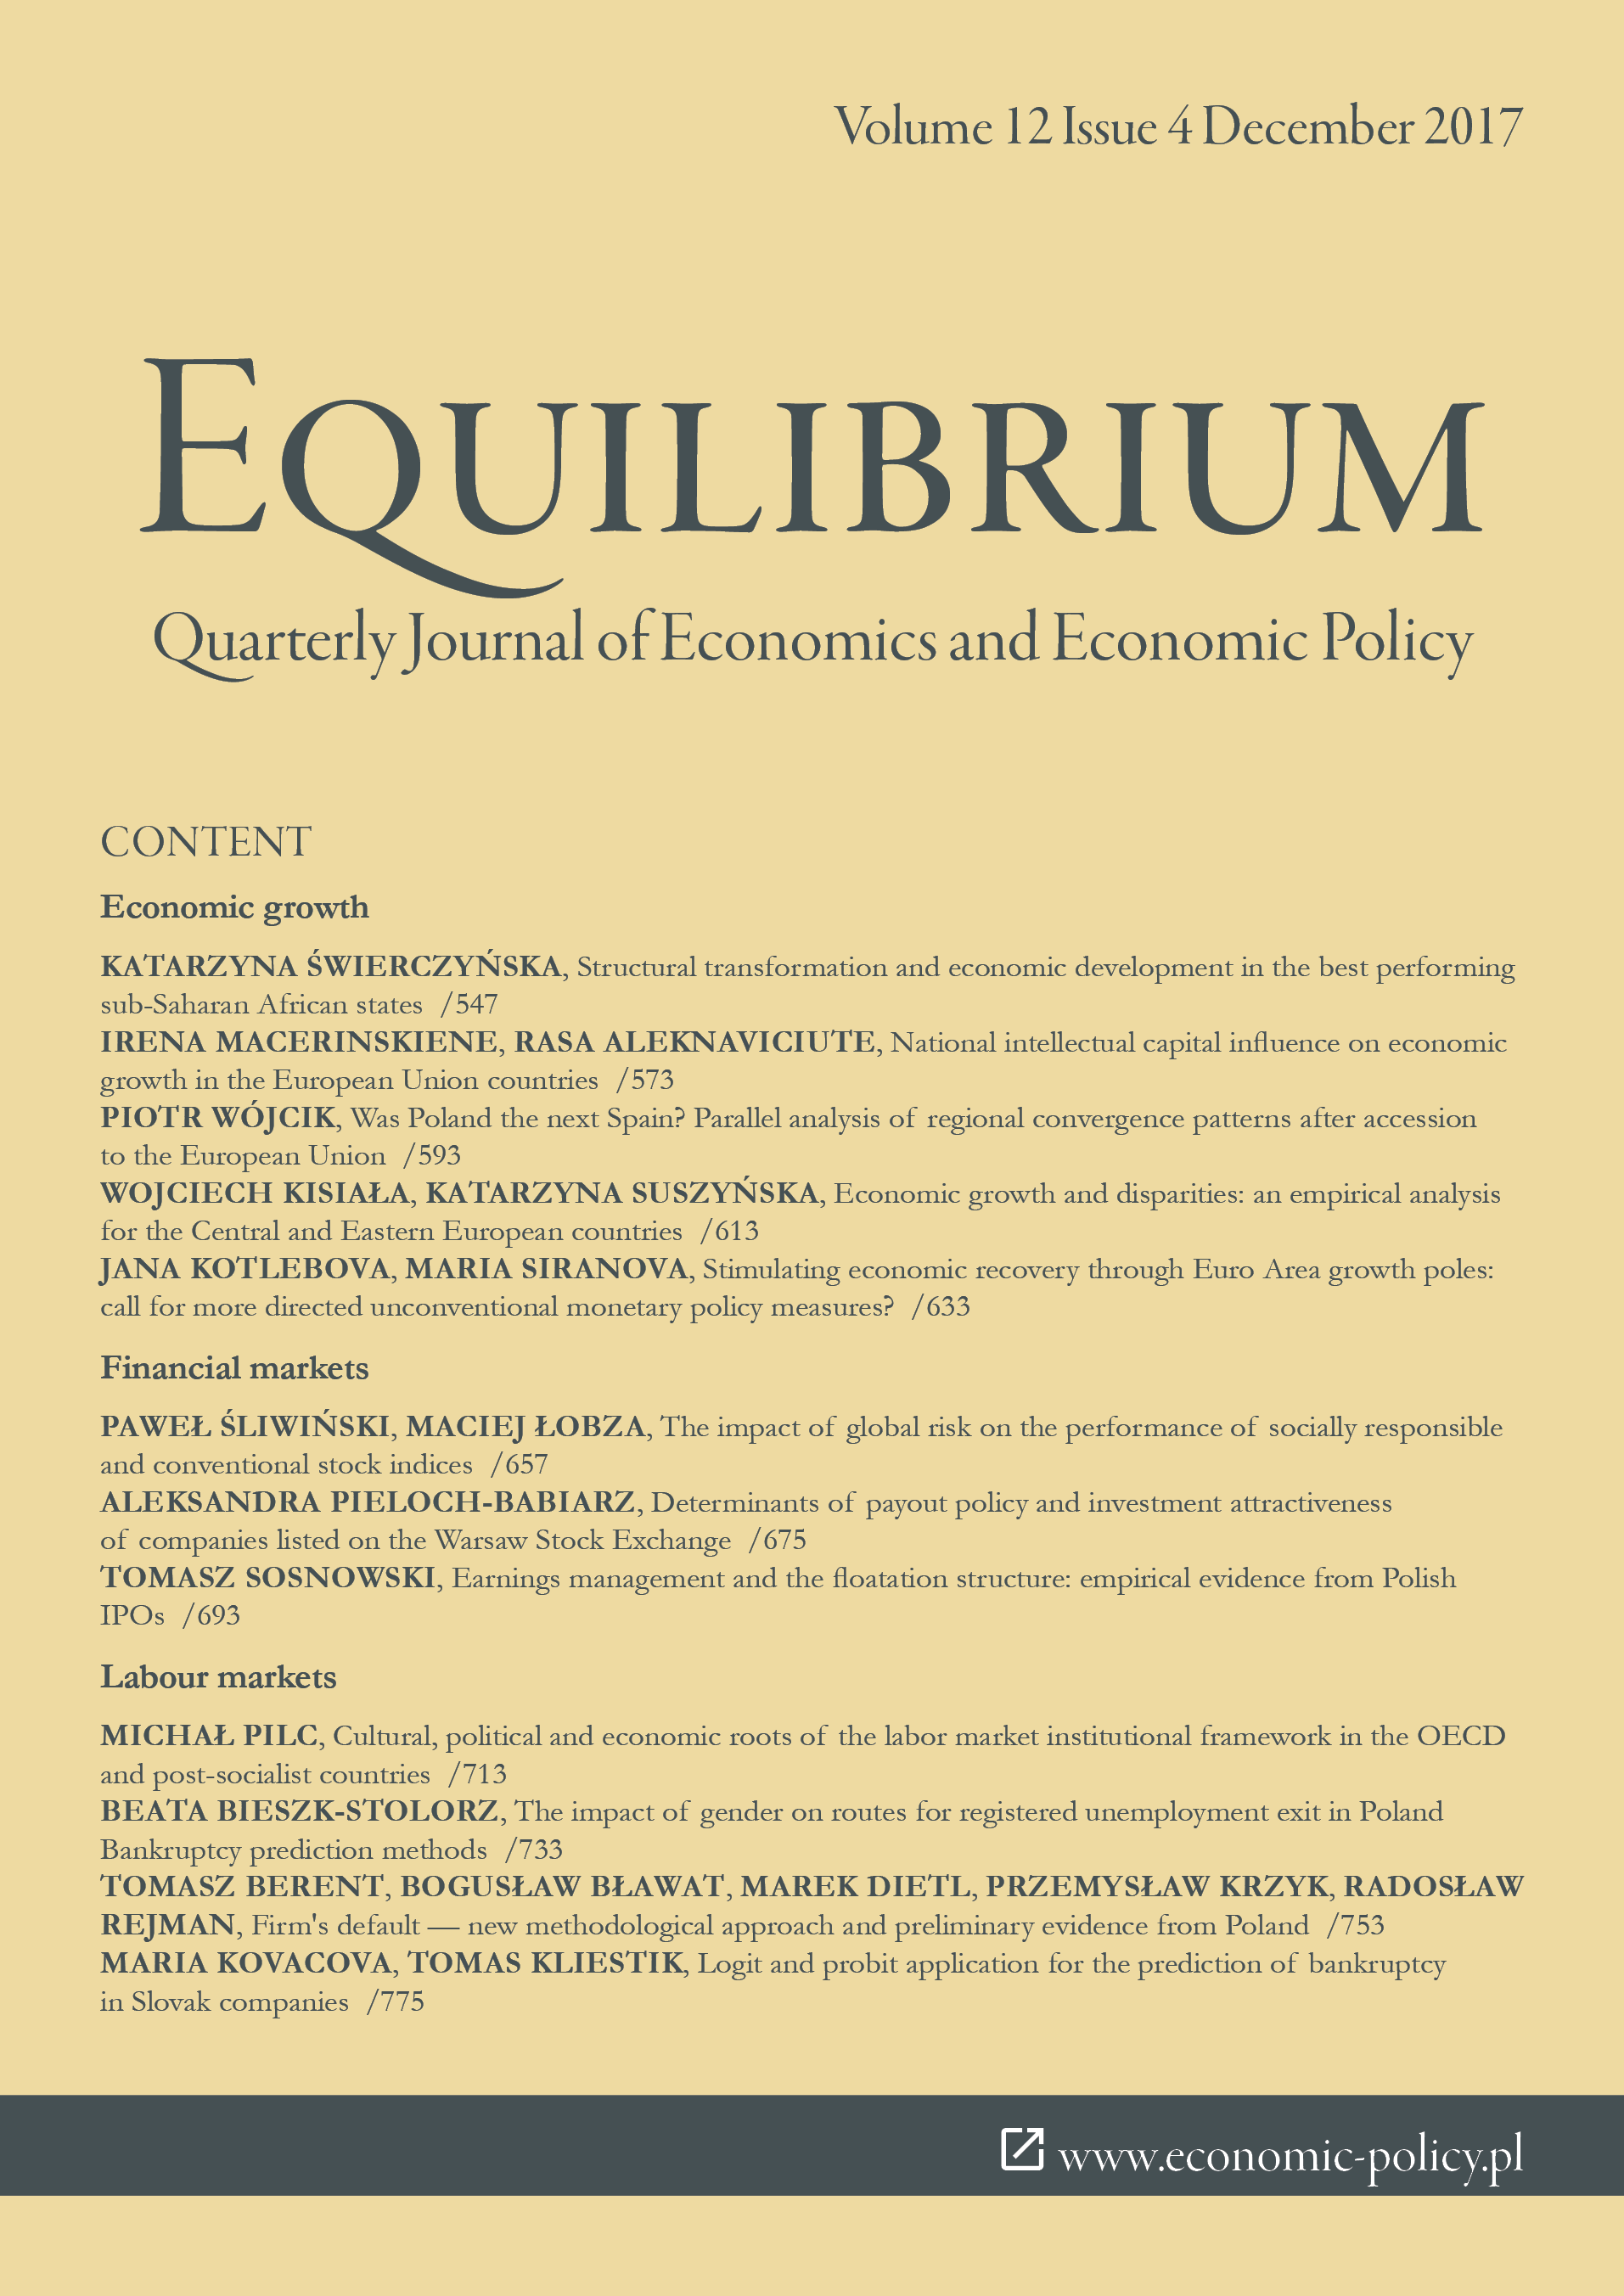 Economic growth and disparities: an empirical analysis for the Central and Eastern European countries Cover Image